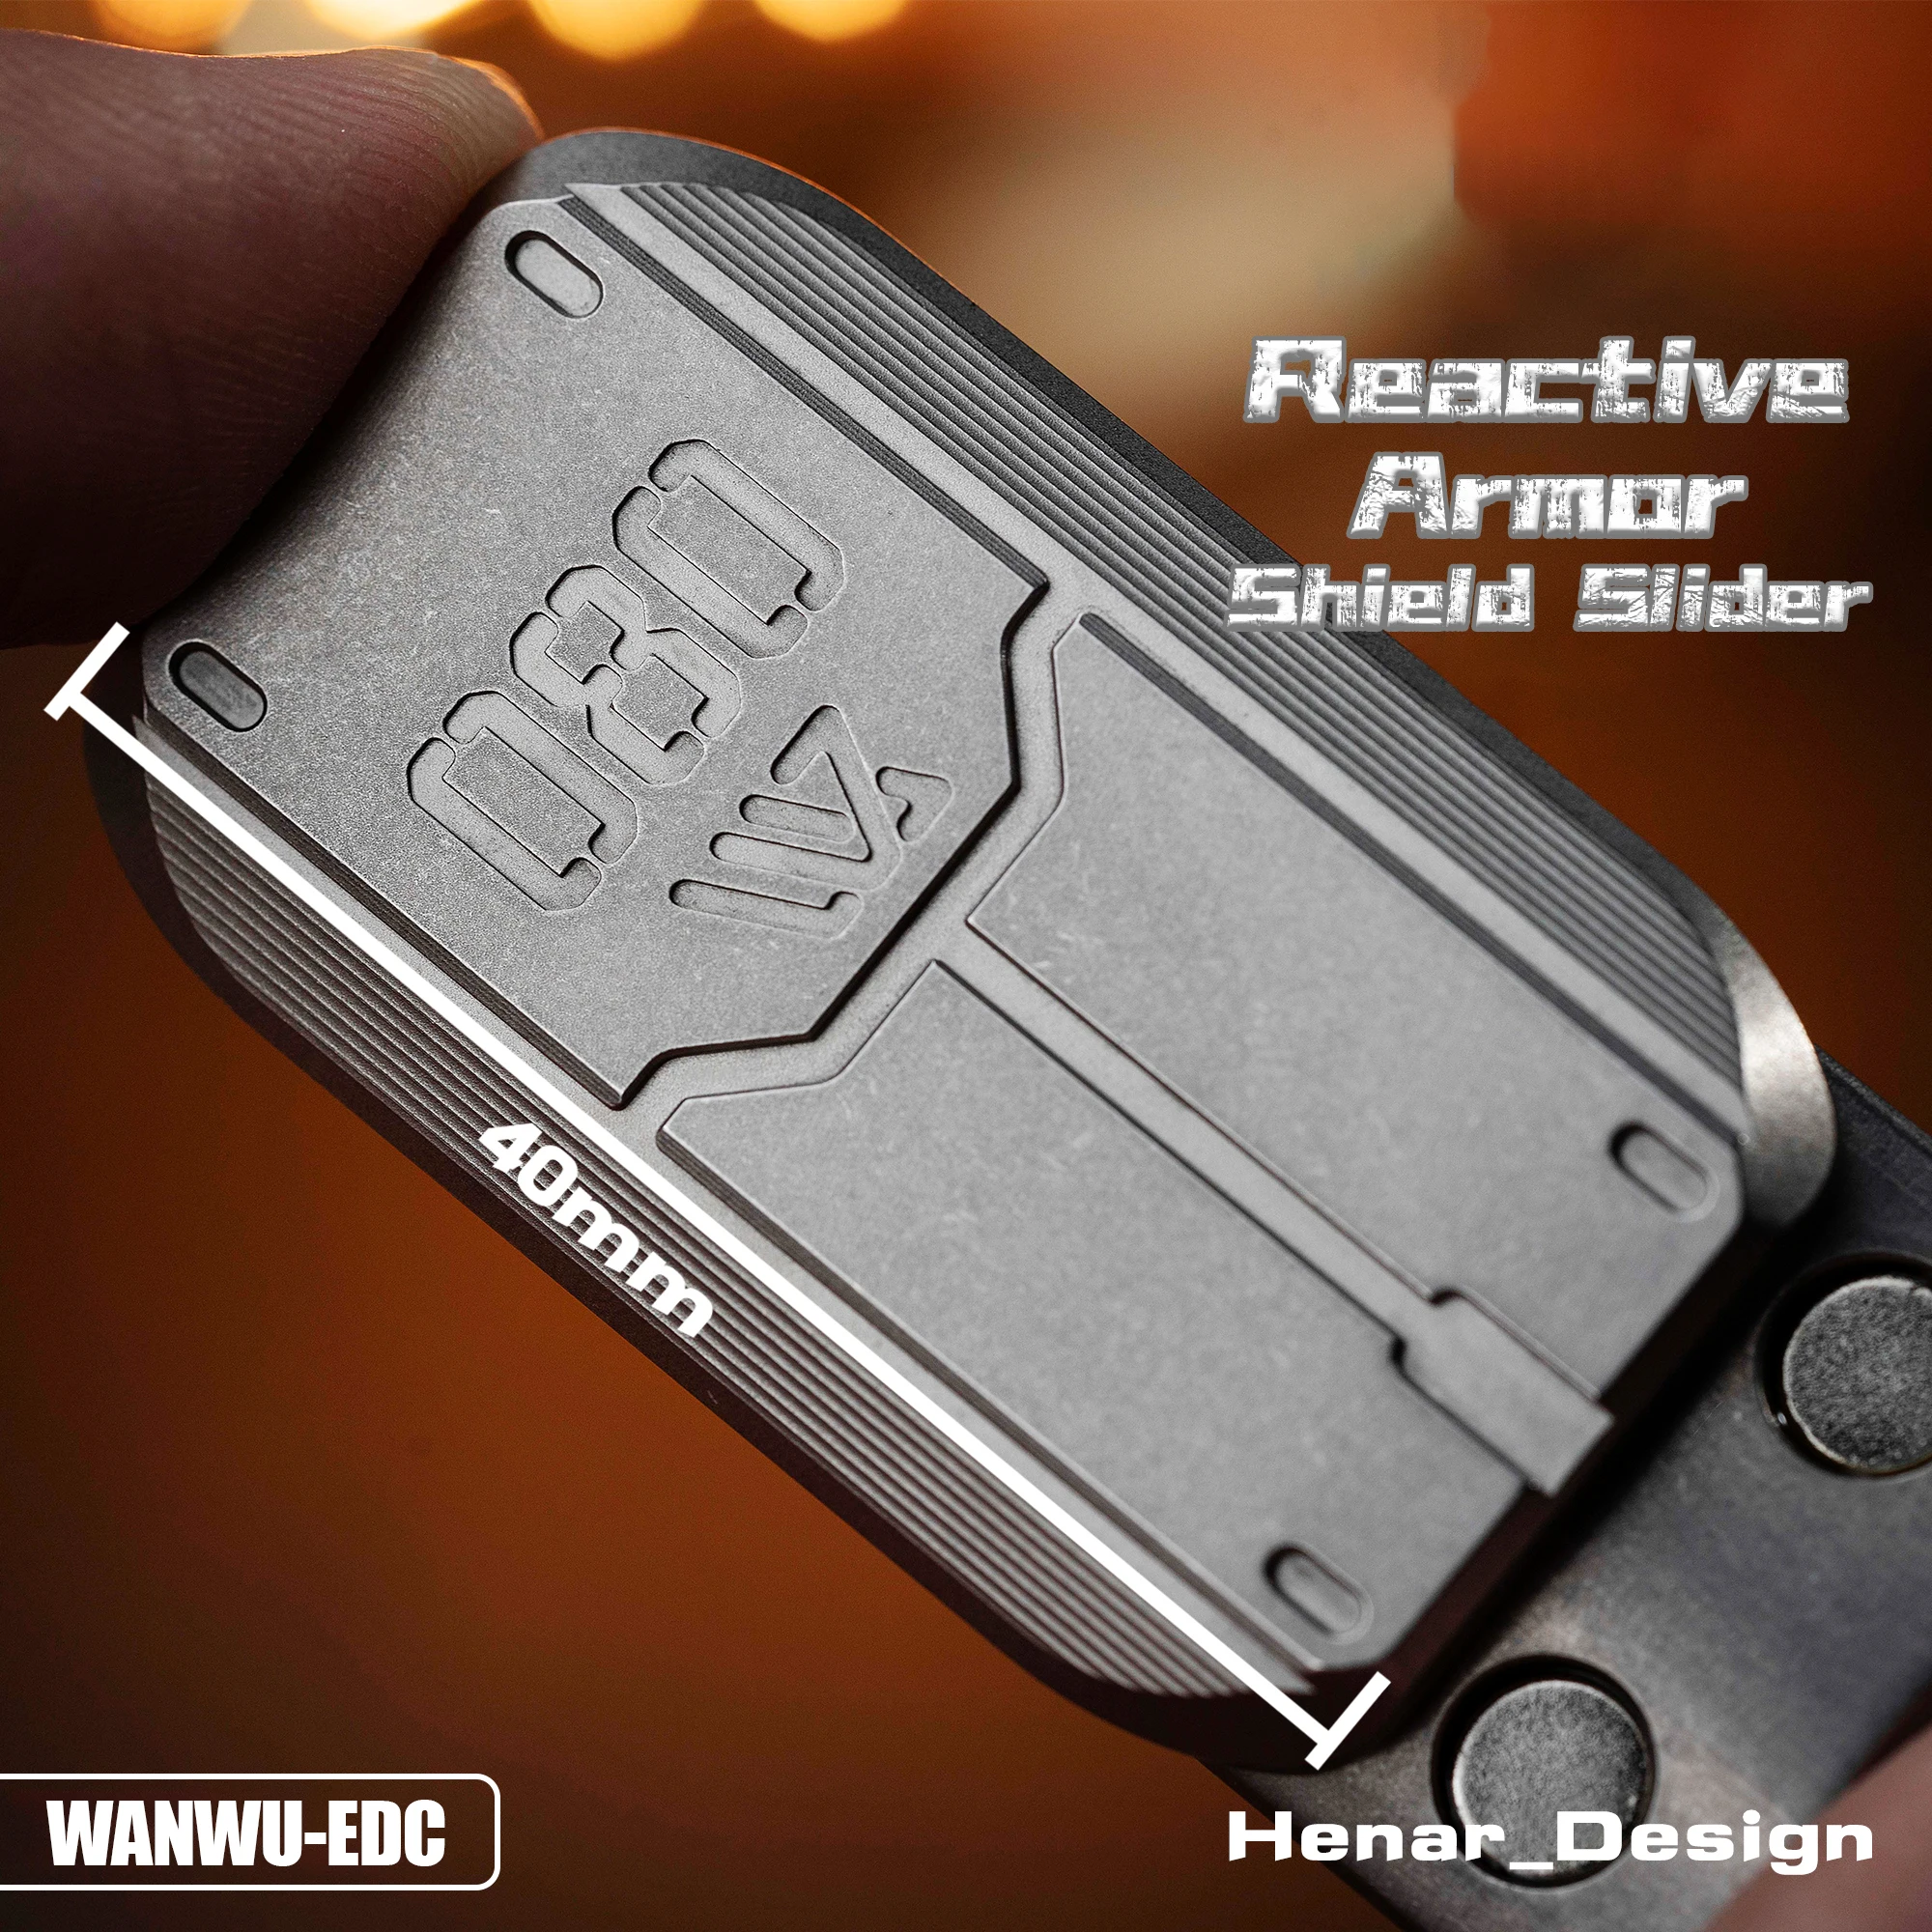 WANWU Reactive Armor Shield Slider Defense Tungsten Copper Moon Surface Stonewashed Tech EDC Adult Decompression Toy enlarge